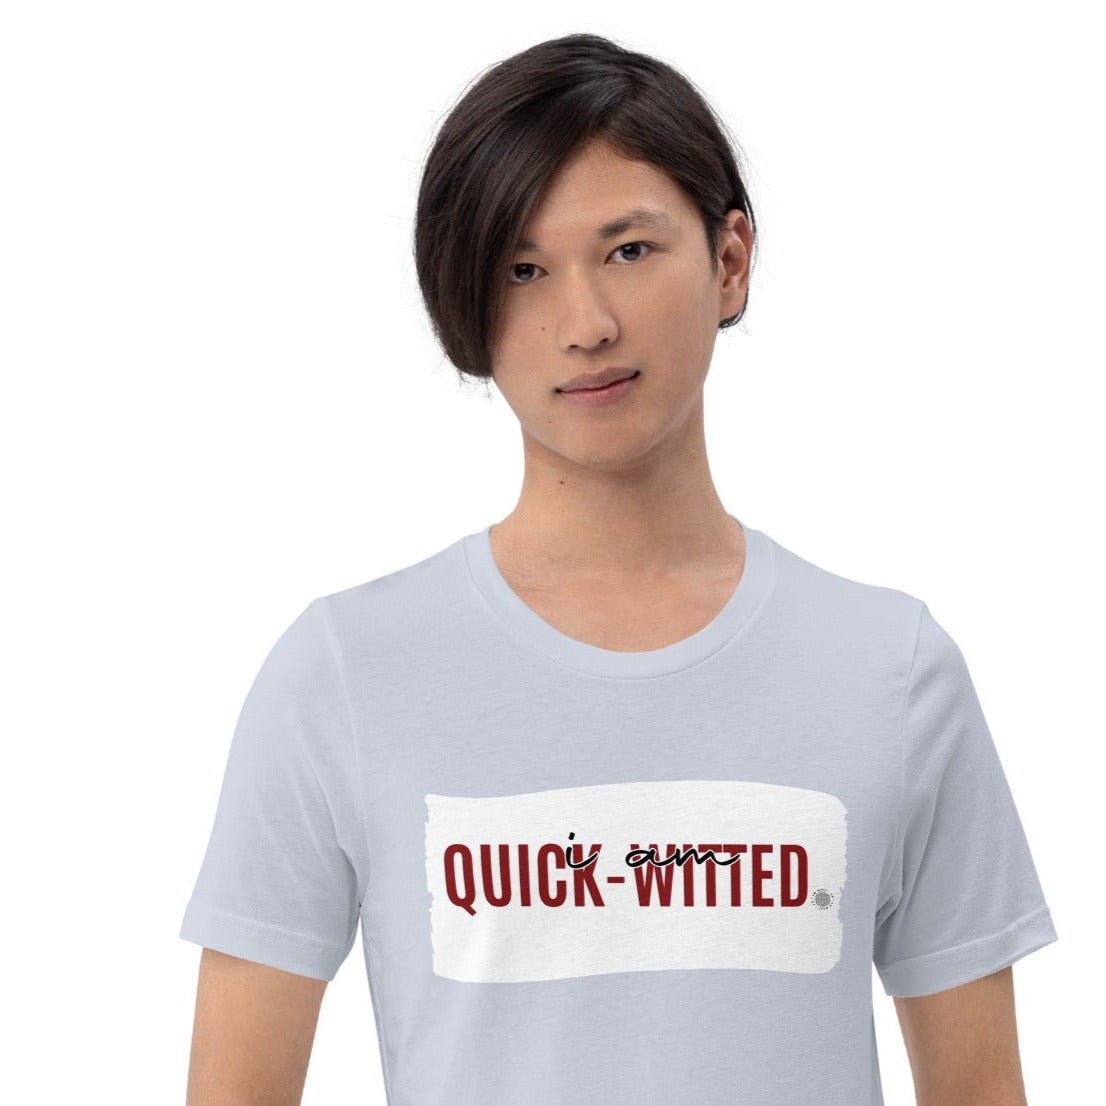 I Am Quick-witted Adult Unisex T-Shirt blue